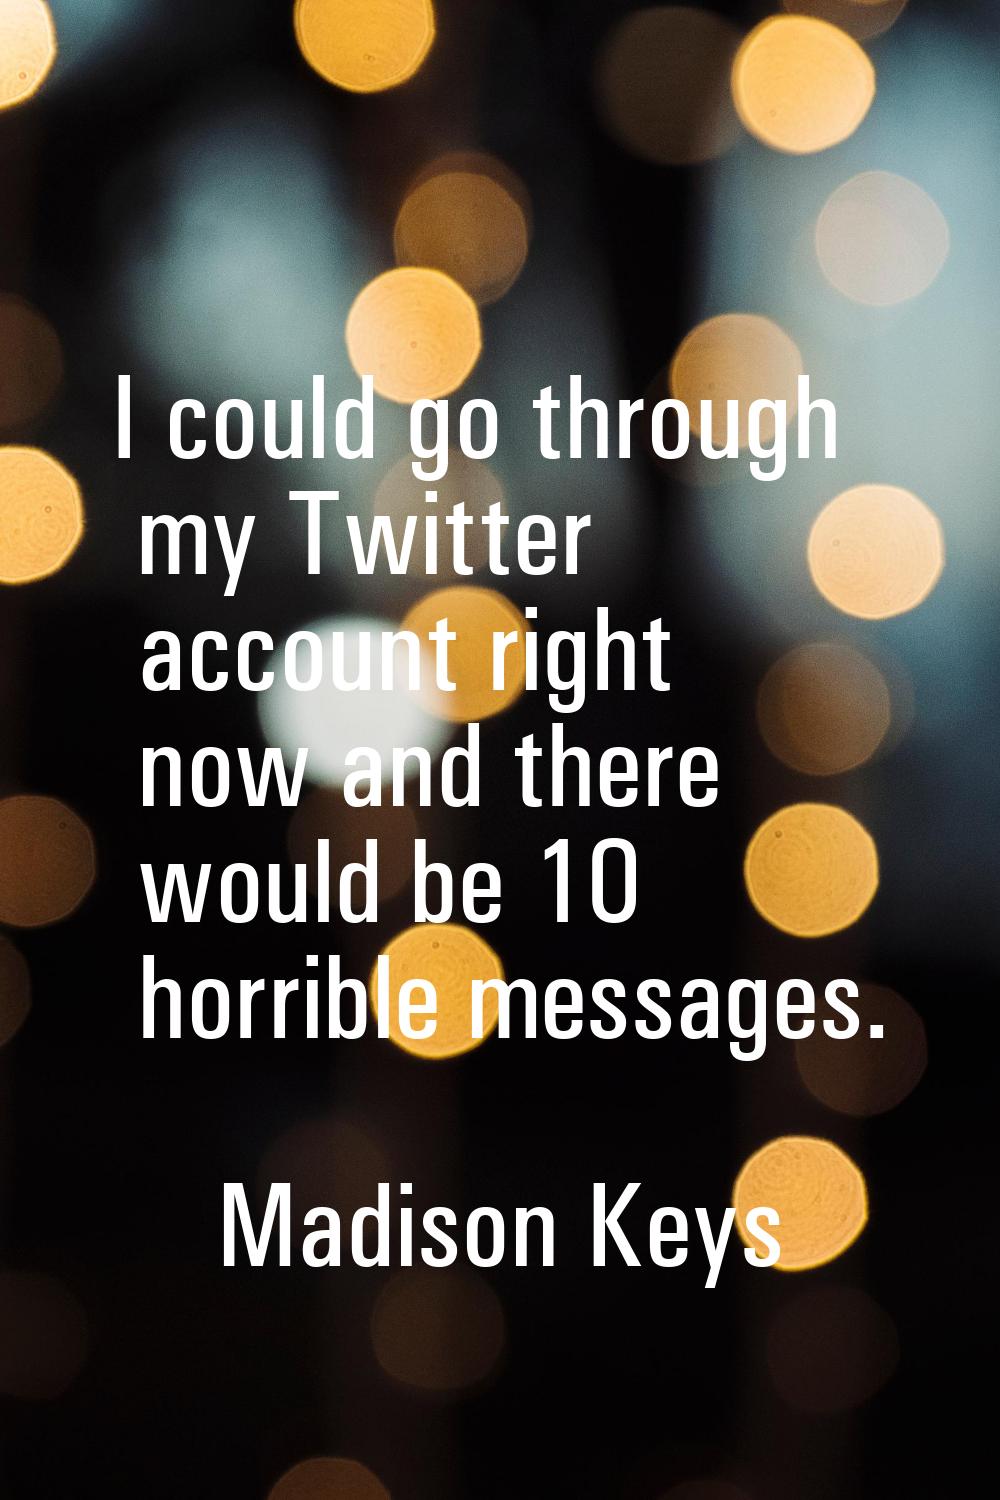 I could go through my Twitter account right now and there would be 10 horrible messages.